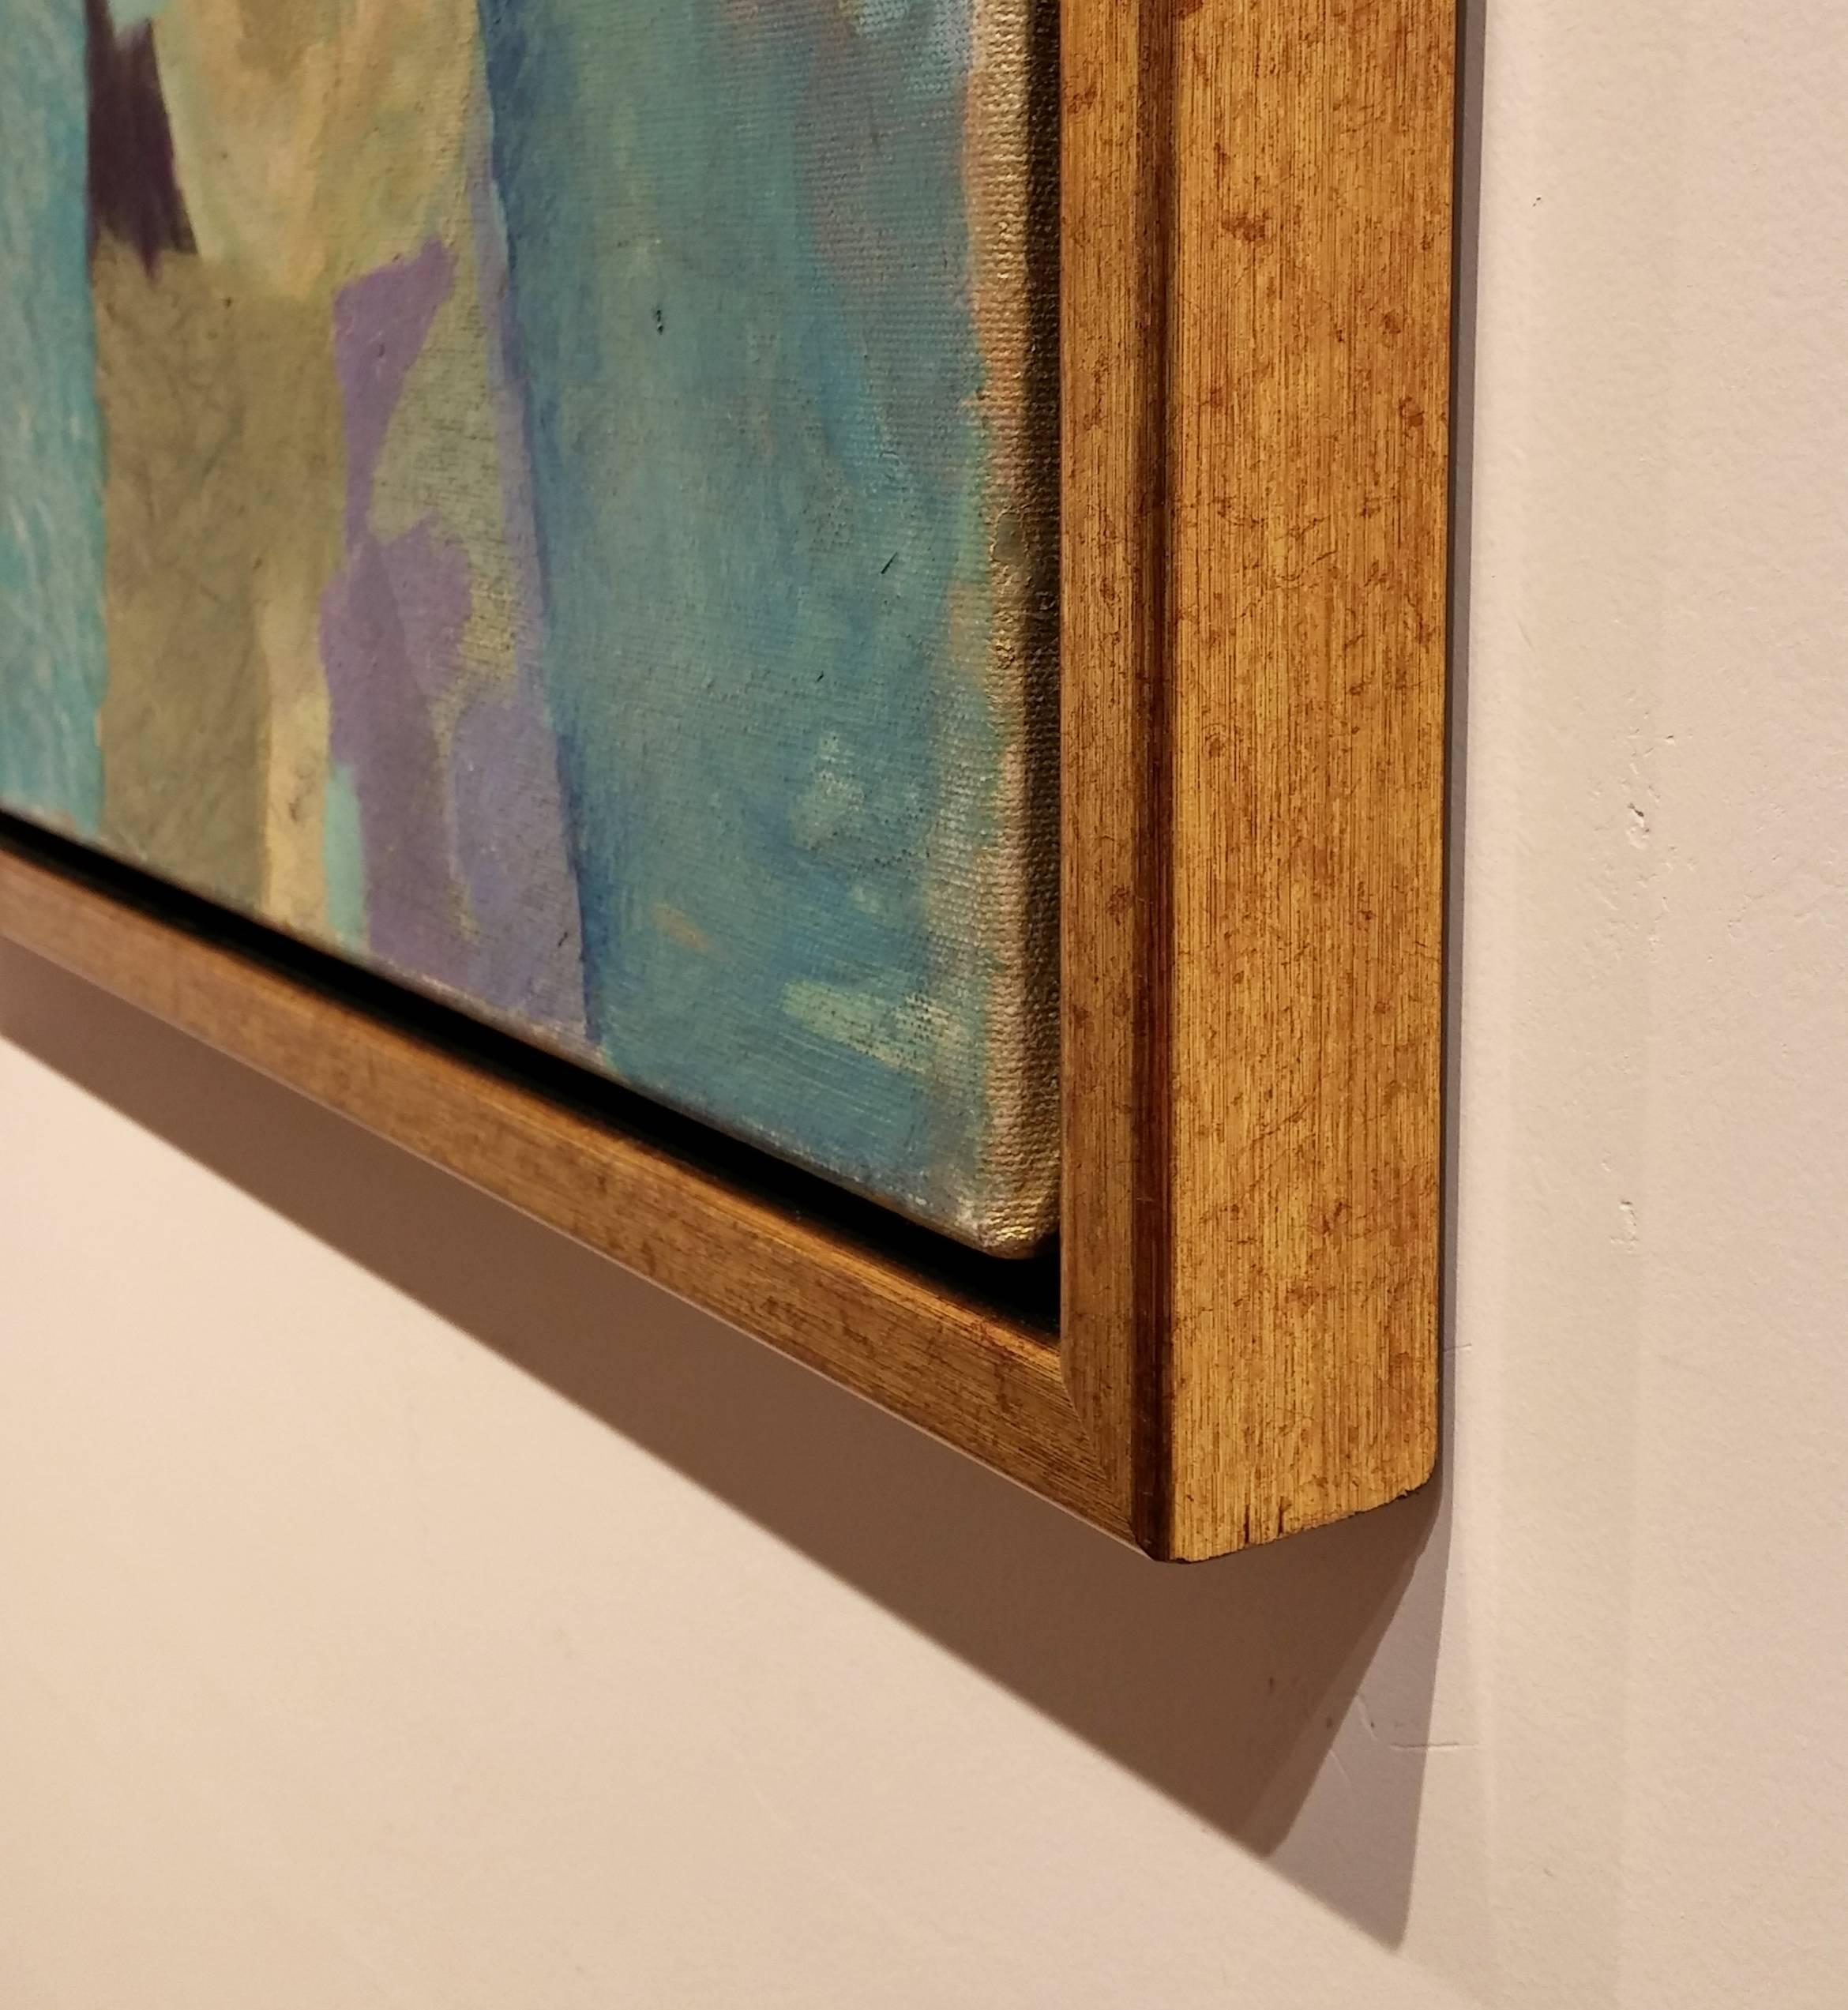 Abstract, shapes, blue, turquoise, yellow, green, Richard Diebenkorn

ABOUT CHRISTINE AVERILL-GREEN

Christine Averill-Green is a resident of the Capital District and has been exhibiting her artwork in galleries and museums in Upstate New York